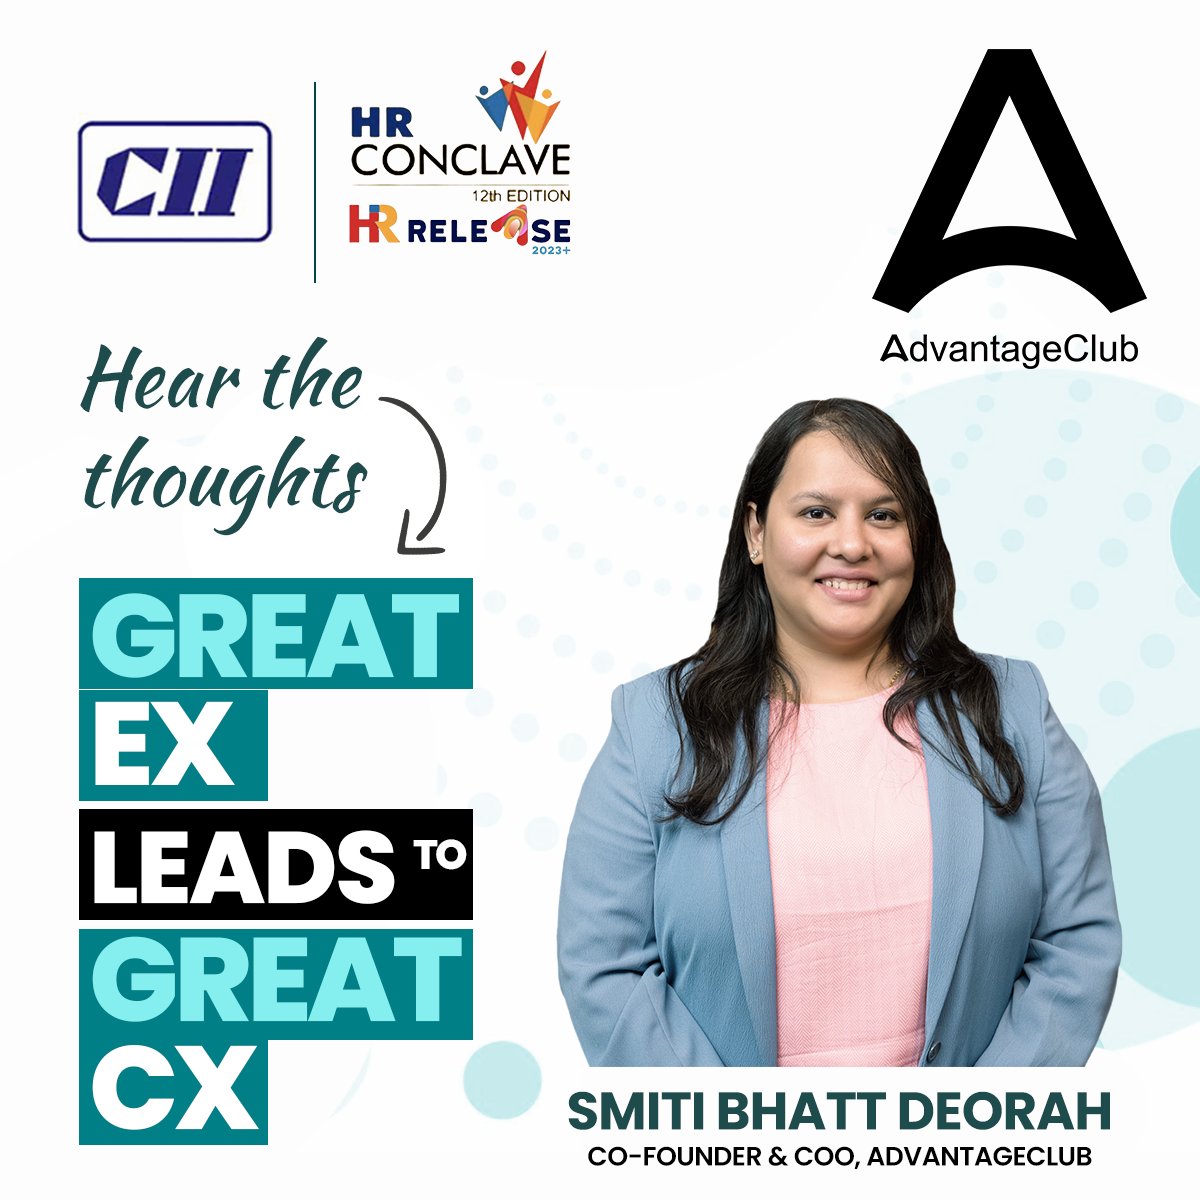 Our Co-founder & COO, Smiti Bhatt Deorah, will be sharing her insights on 'Great Ex leads to Great Cx' at HR Release - 12th CII HR Conclave 2022.

Meet us on November 29-30, 2022, at The Lalit, Mumbai.
@FollowCII
#CIIHRConclave22  #HRTechPartners